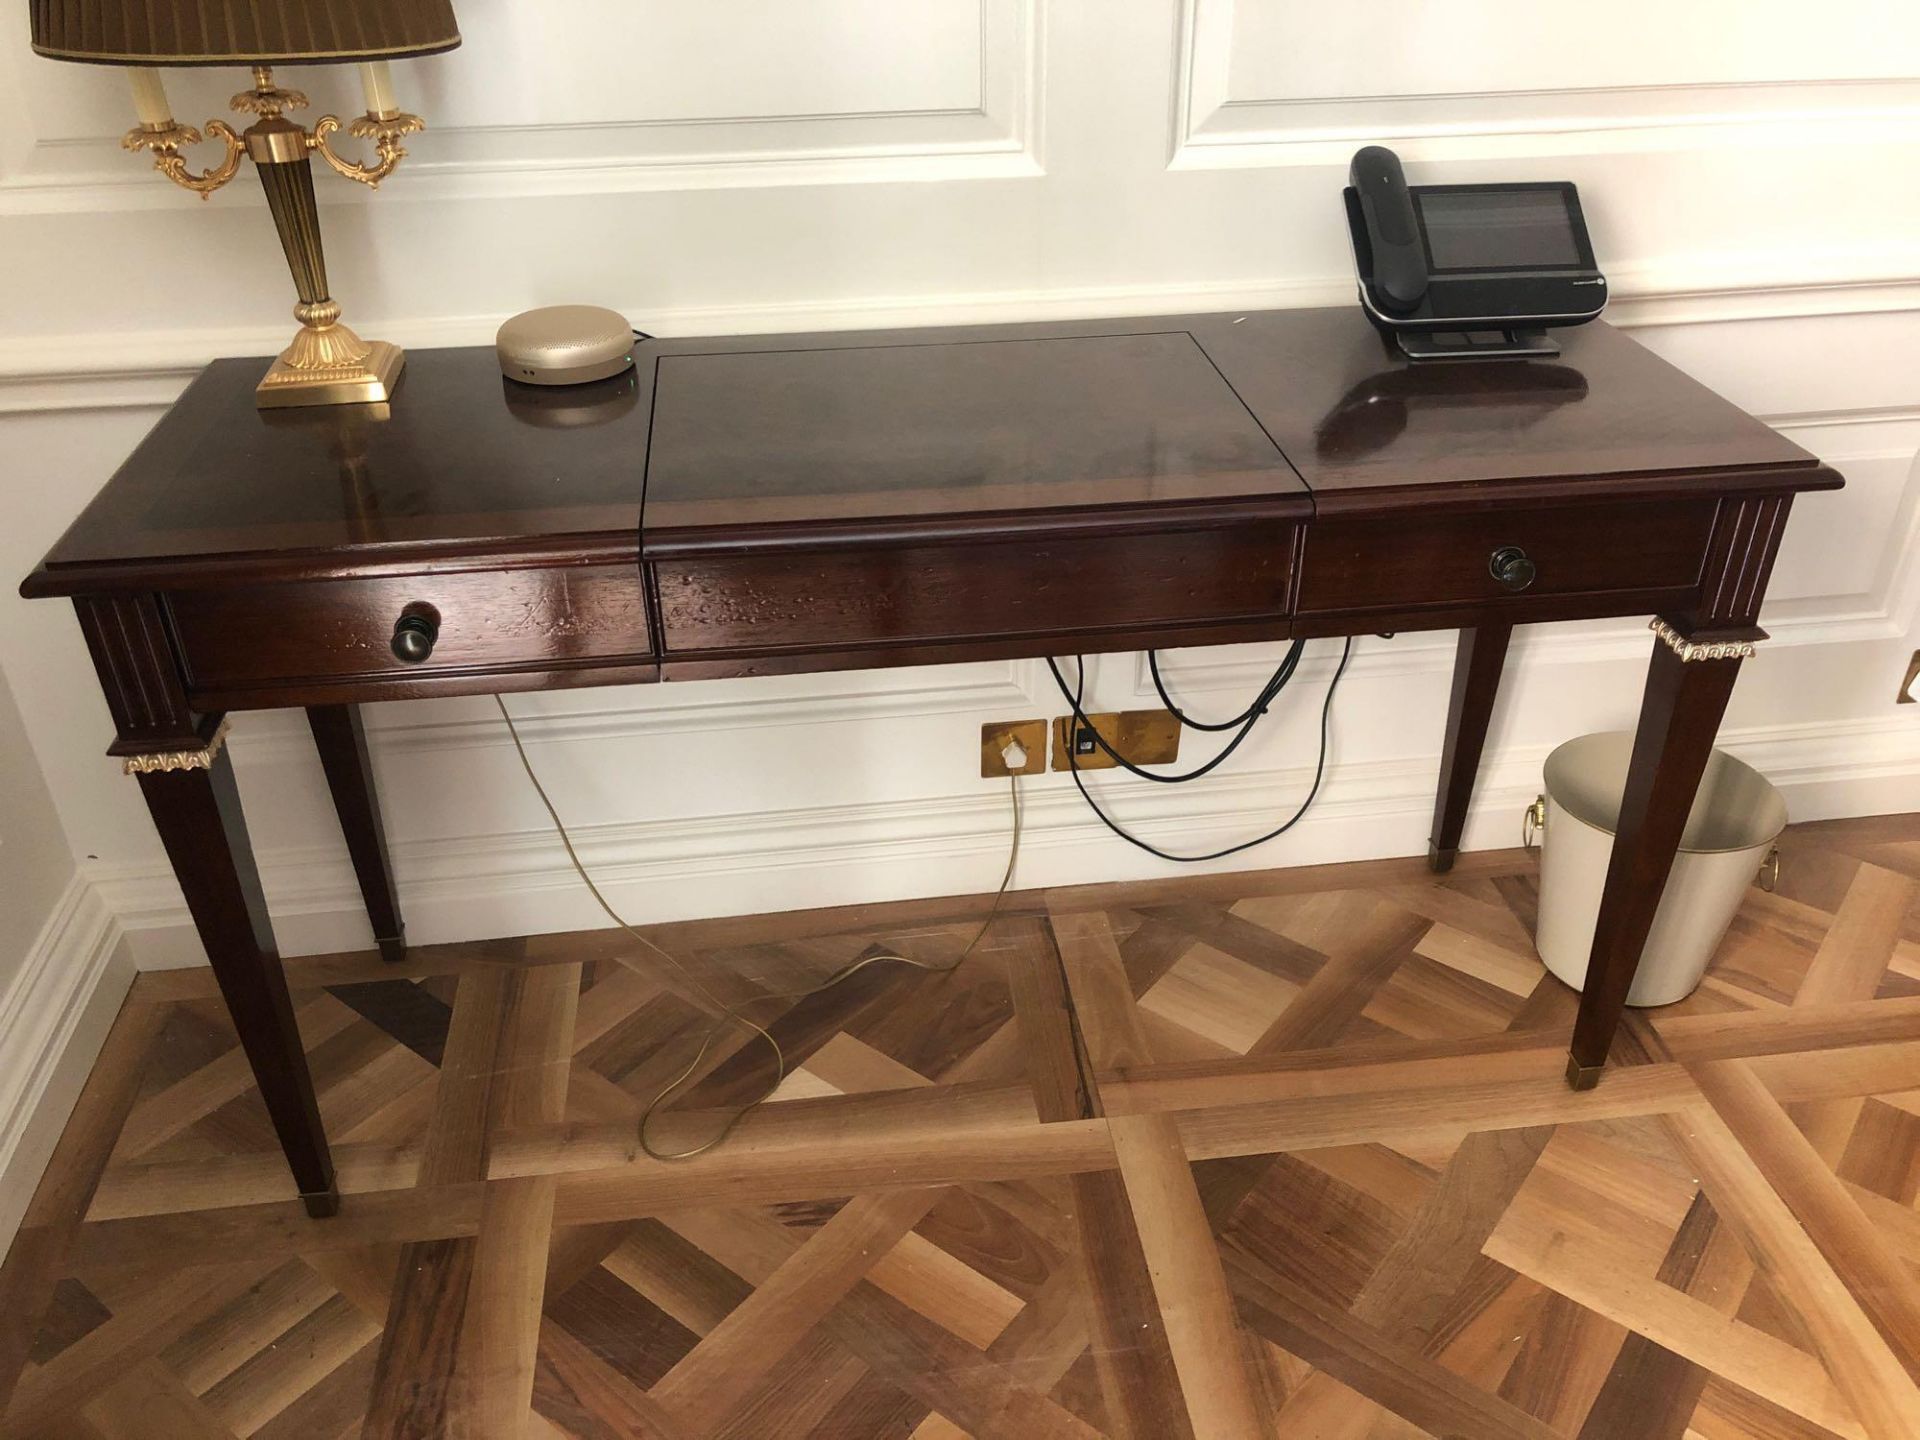 Kingswood Writing Desk / Dressing Table With Two Faux Drawers And Pop-Up Leather Lid Fitted